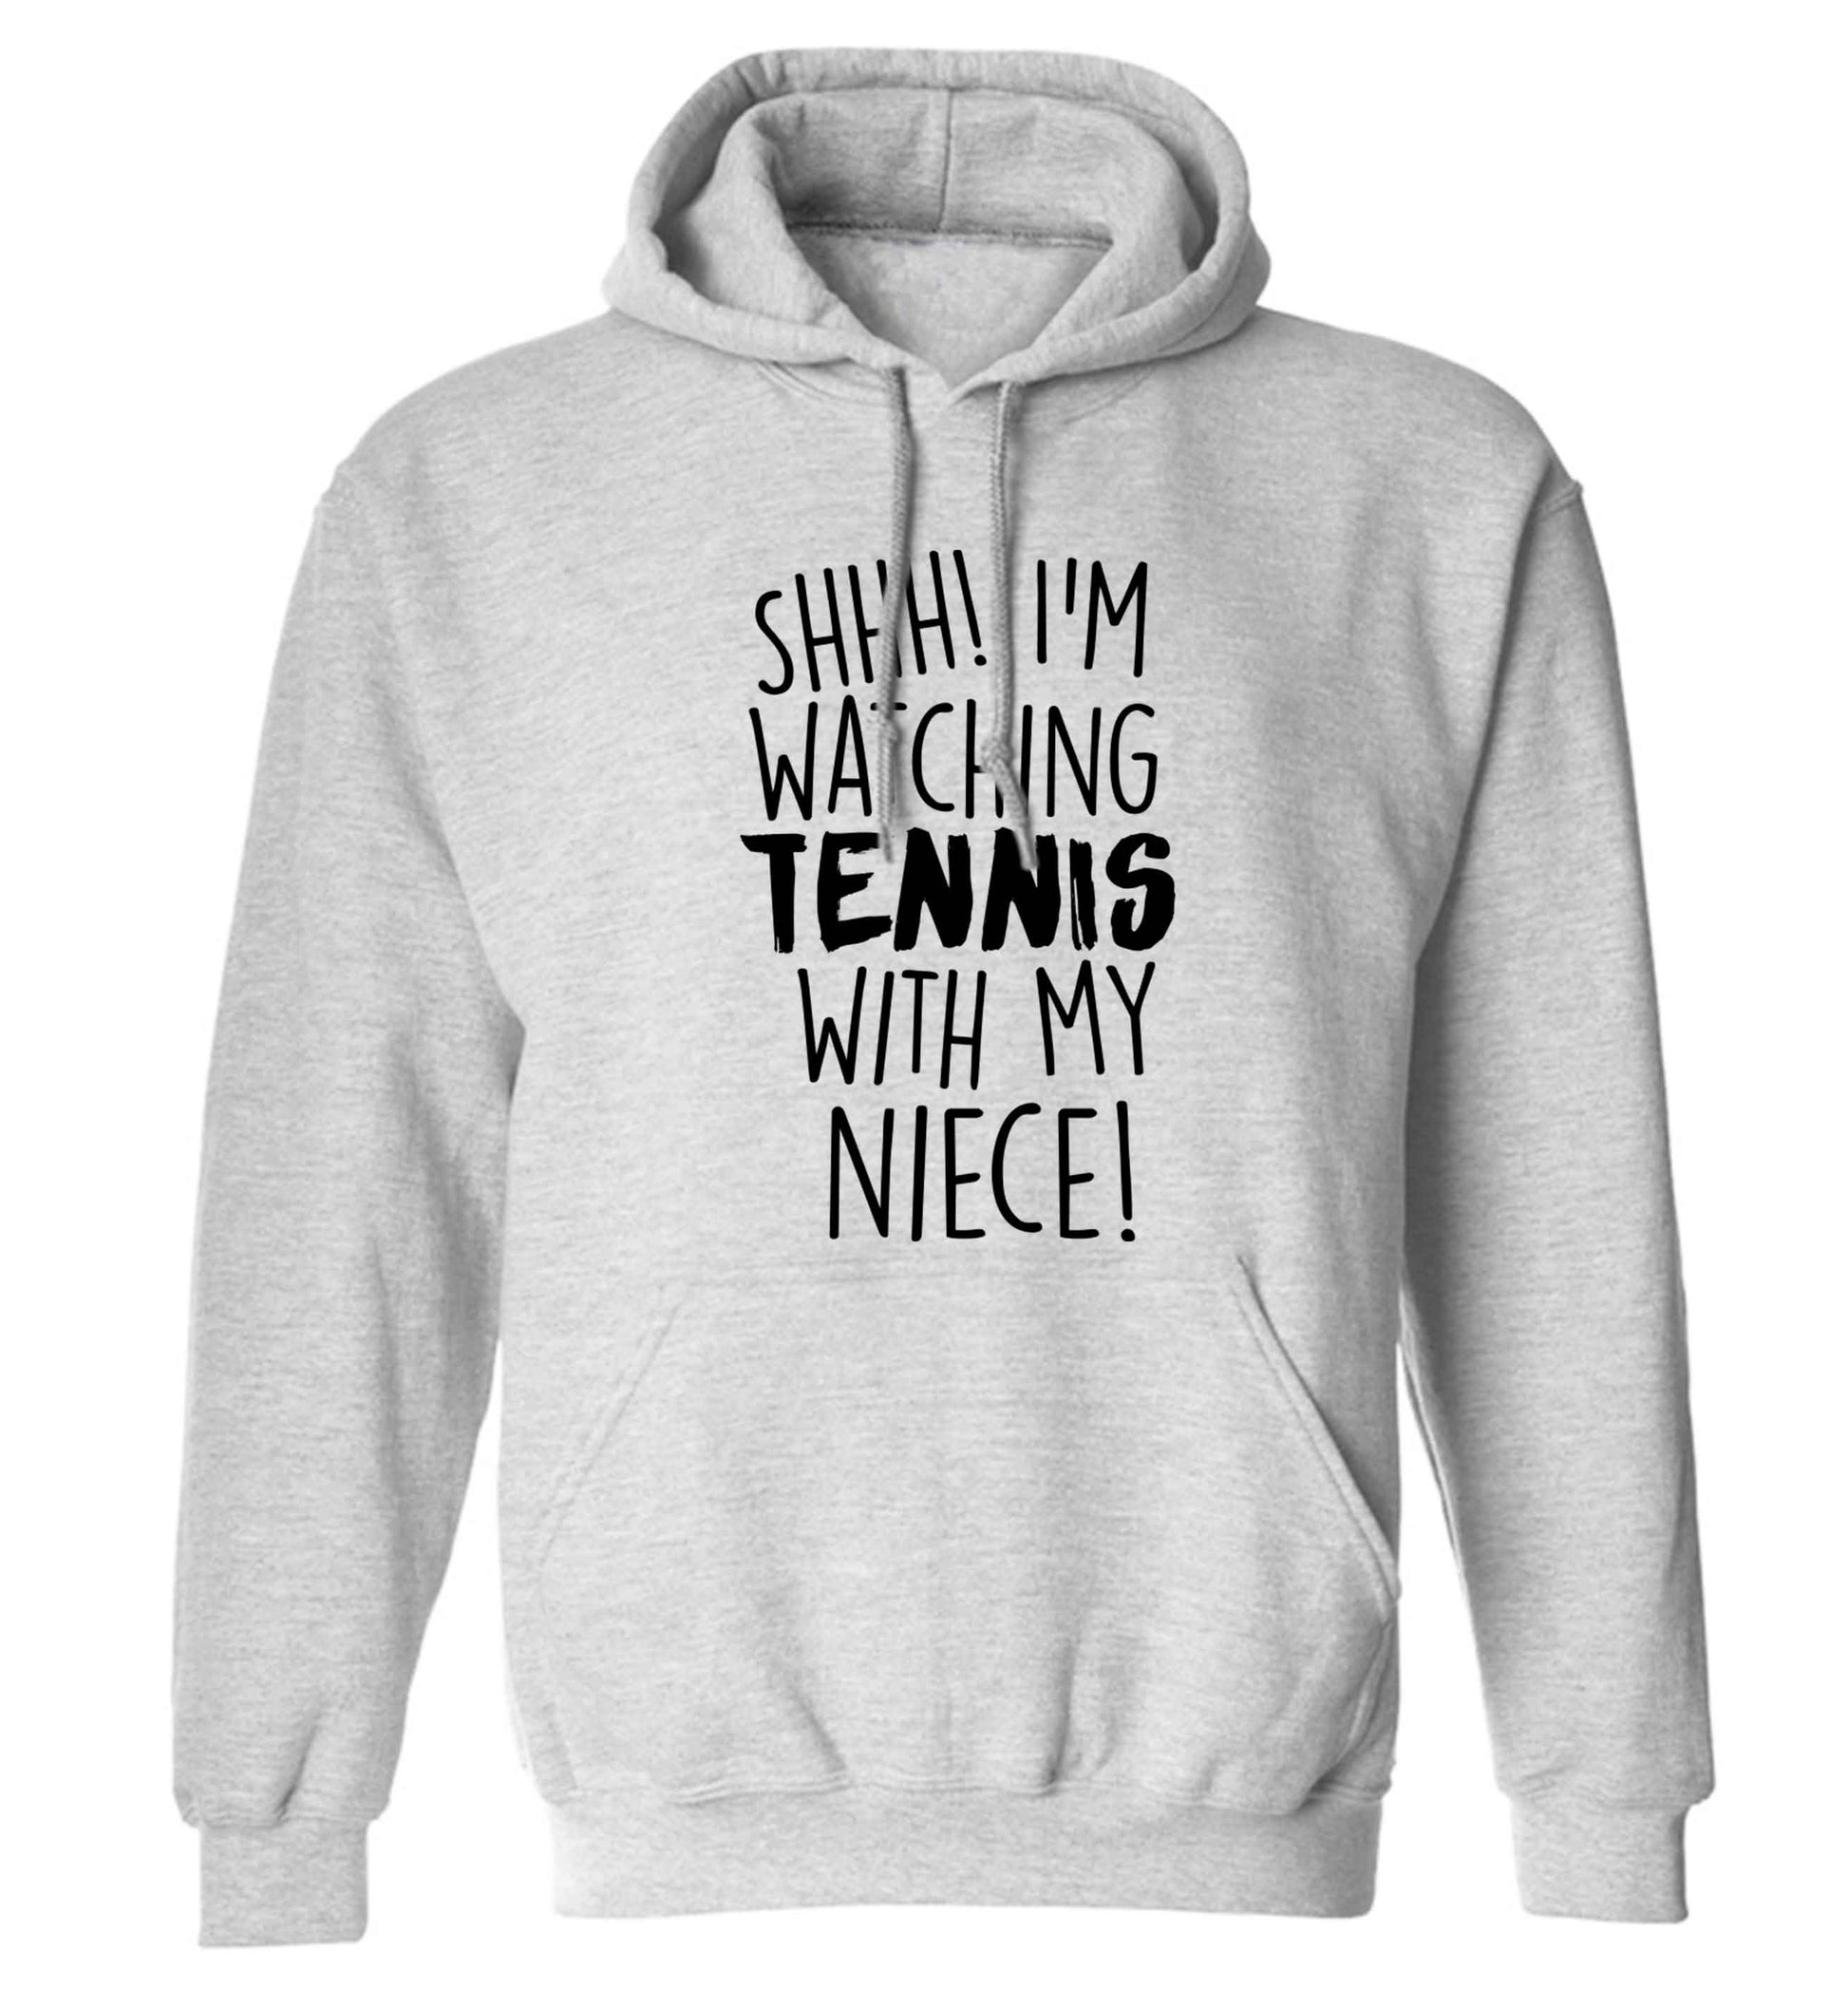 Shh! I'm watching tennis with my niece! adults unisex grey hoodie 2XL